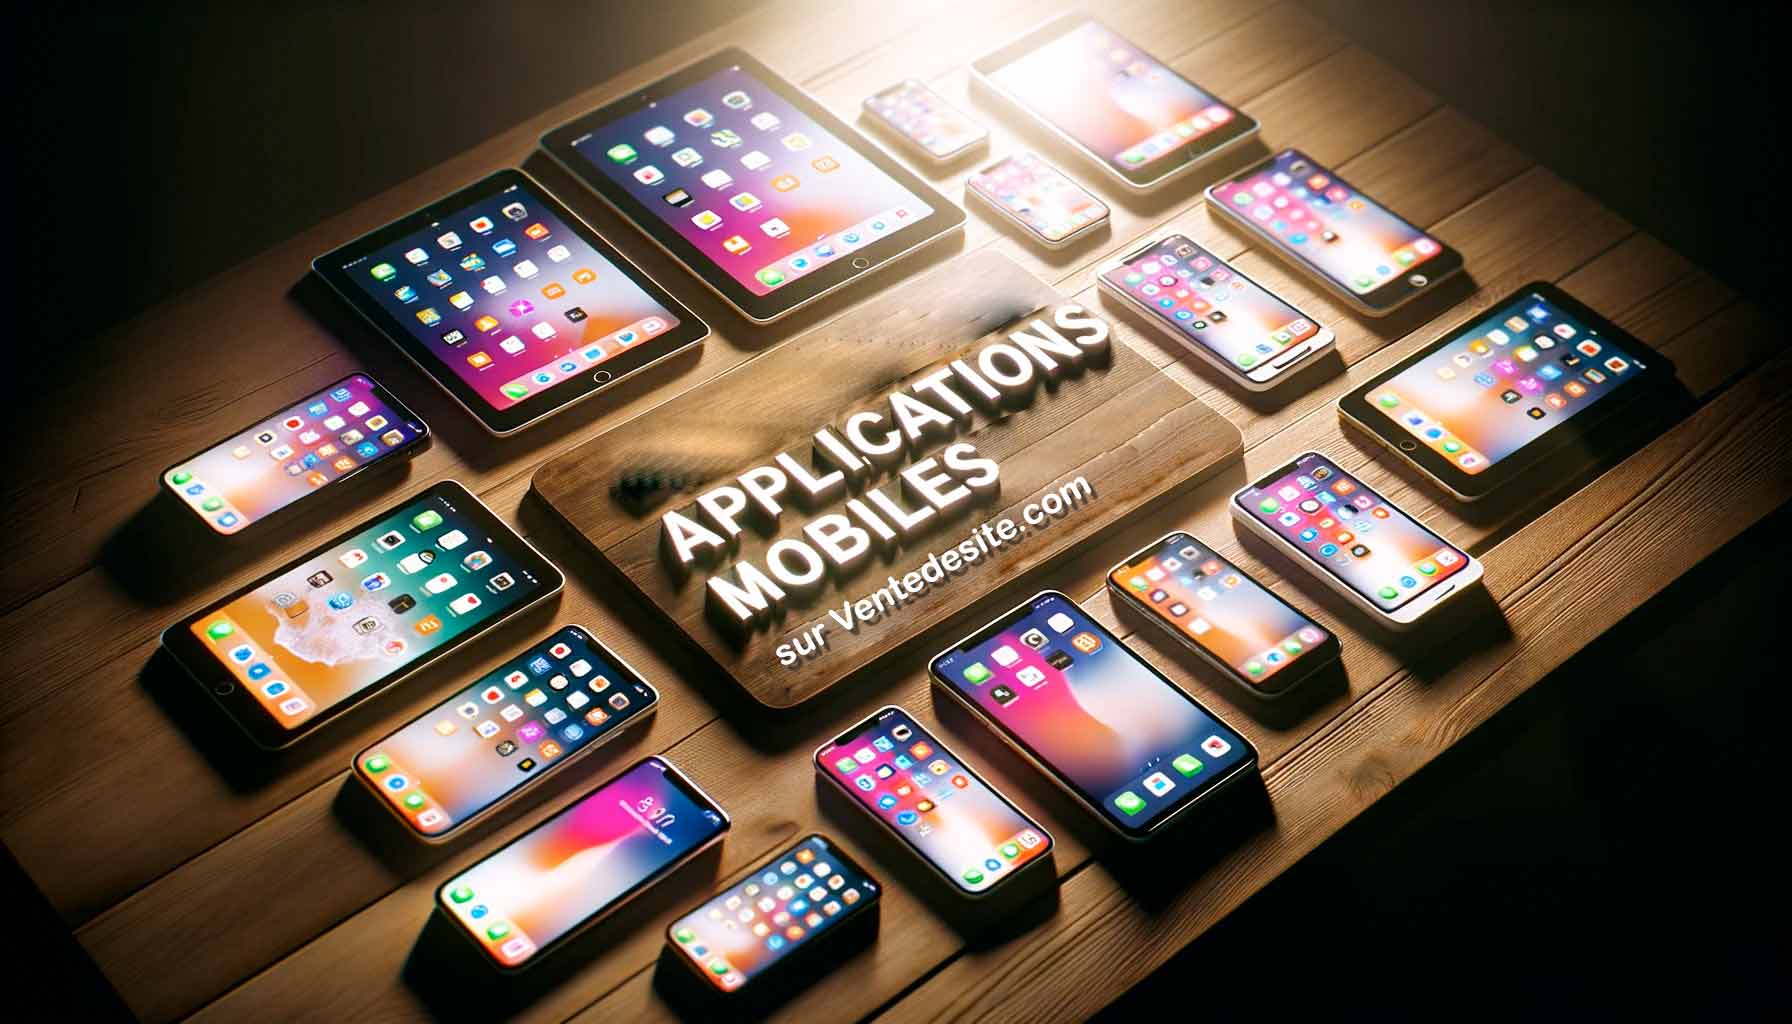 applications mobiles